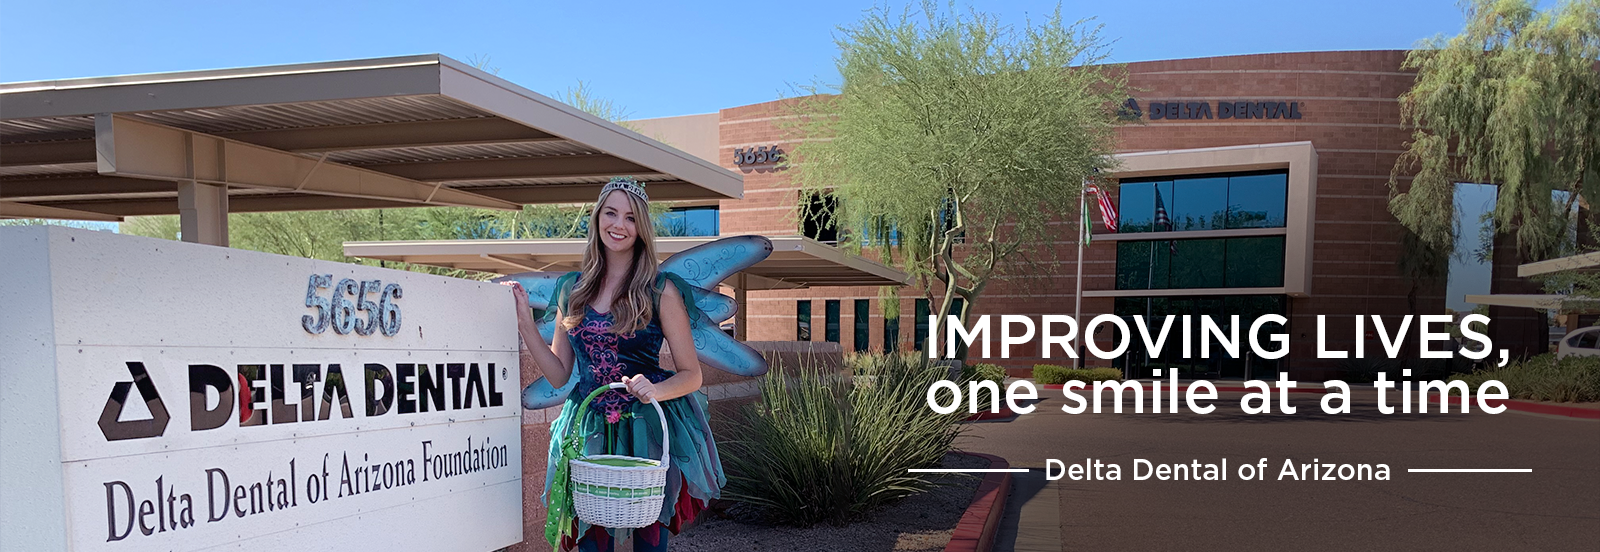 Our company culture and our core values help us improve lives one smile at a time across Arizona 